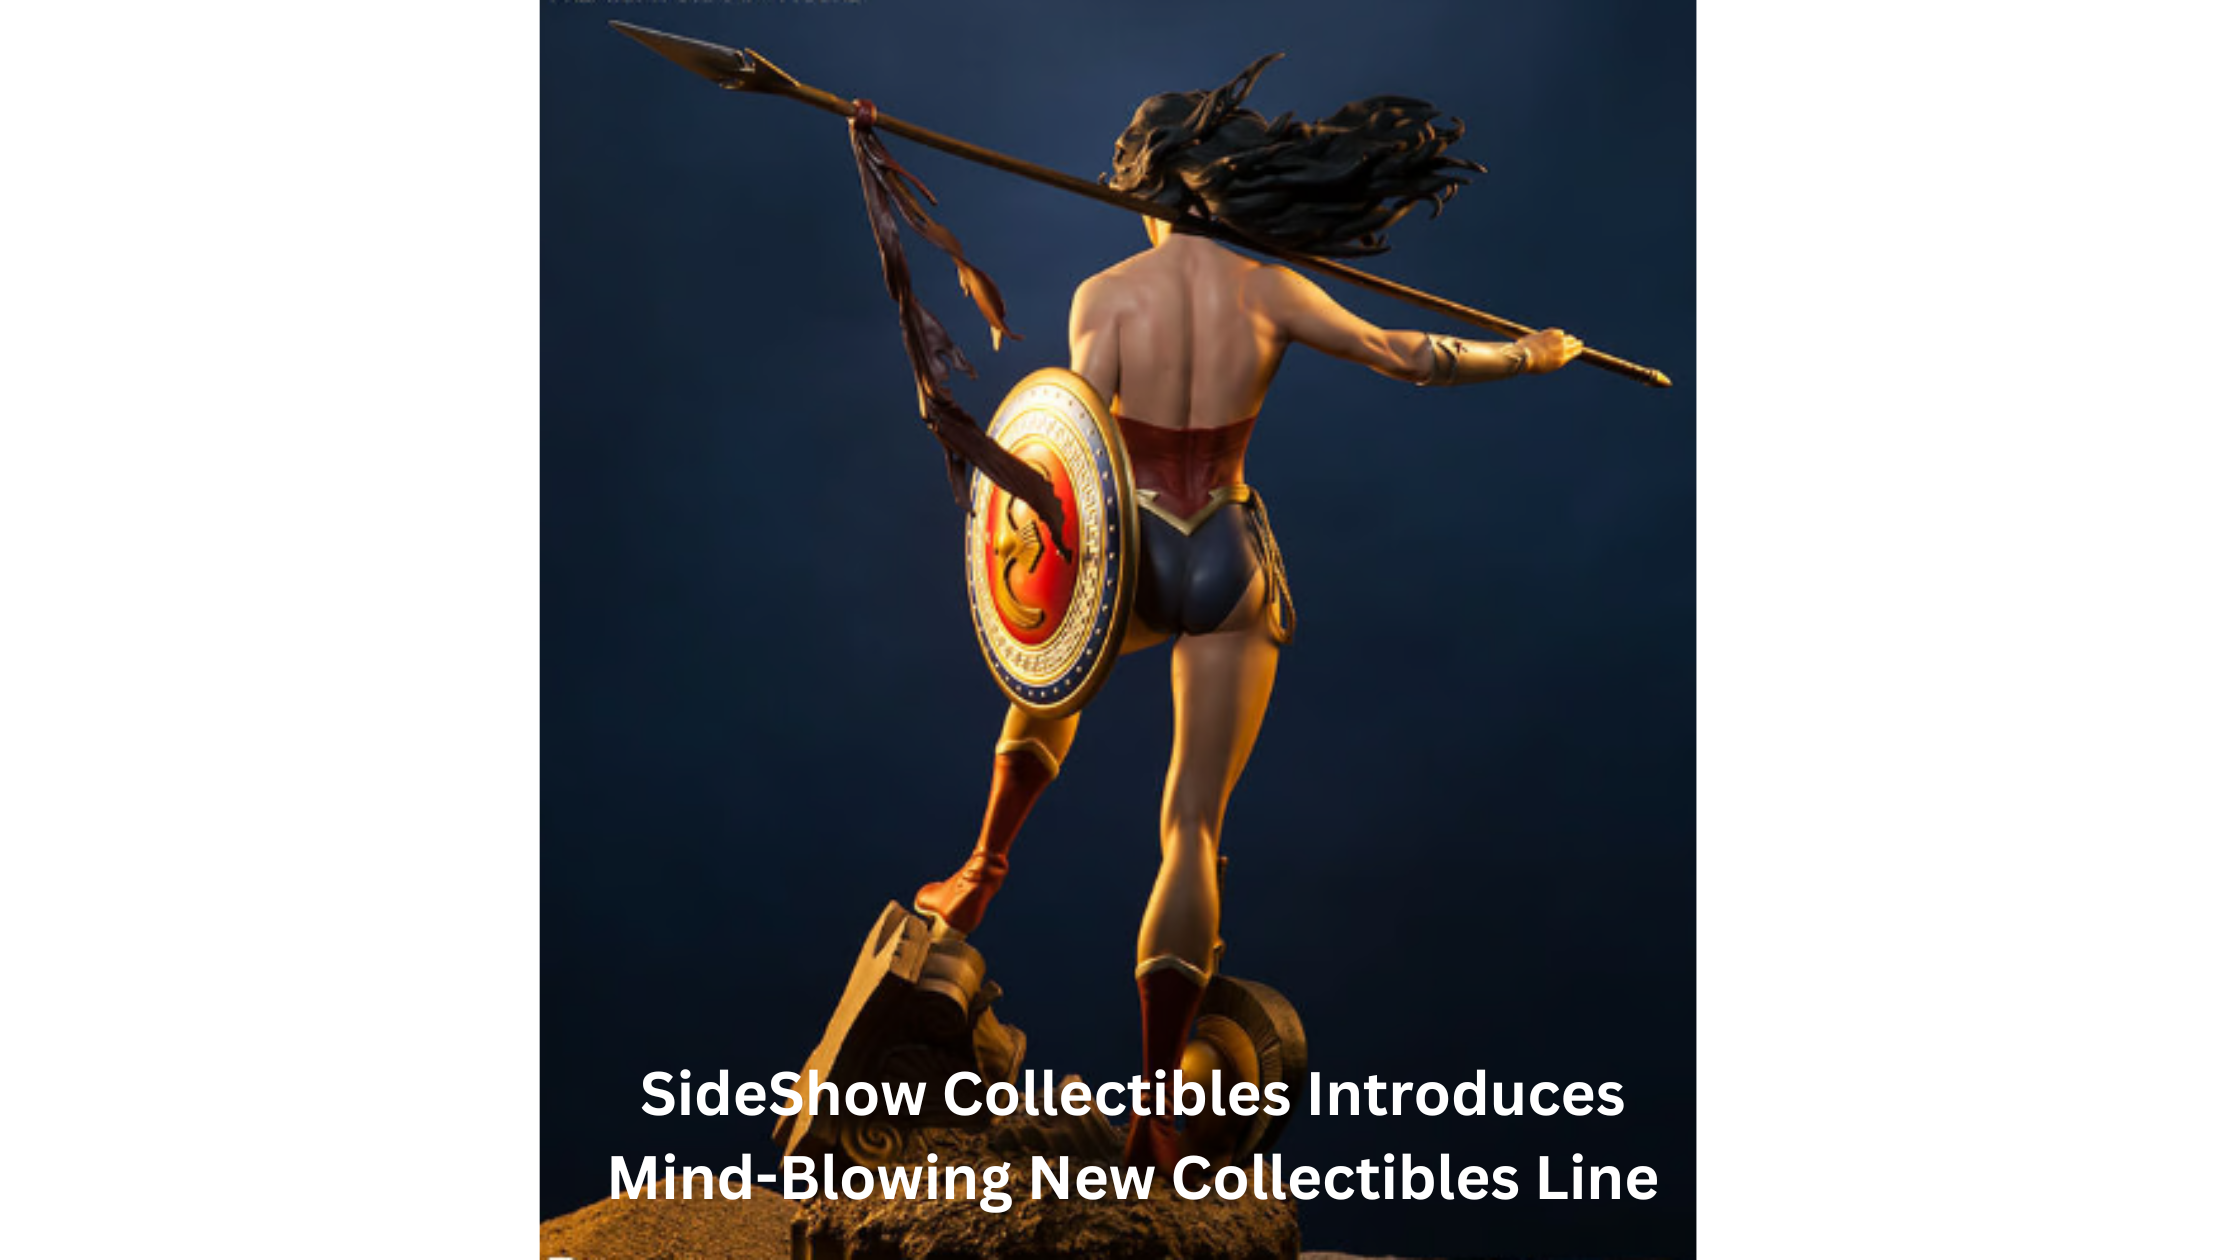 sideshow collectibles